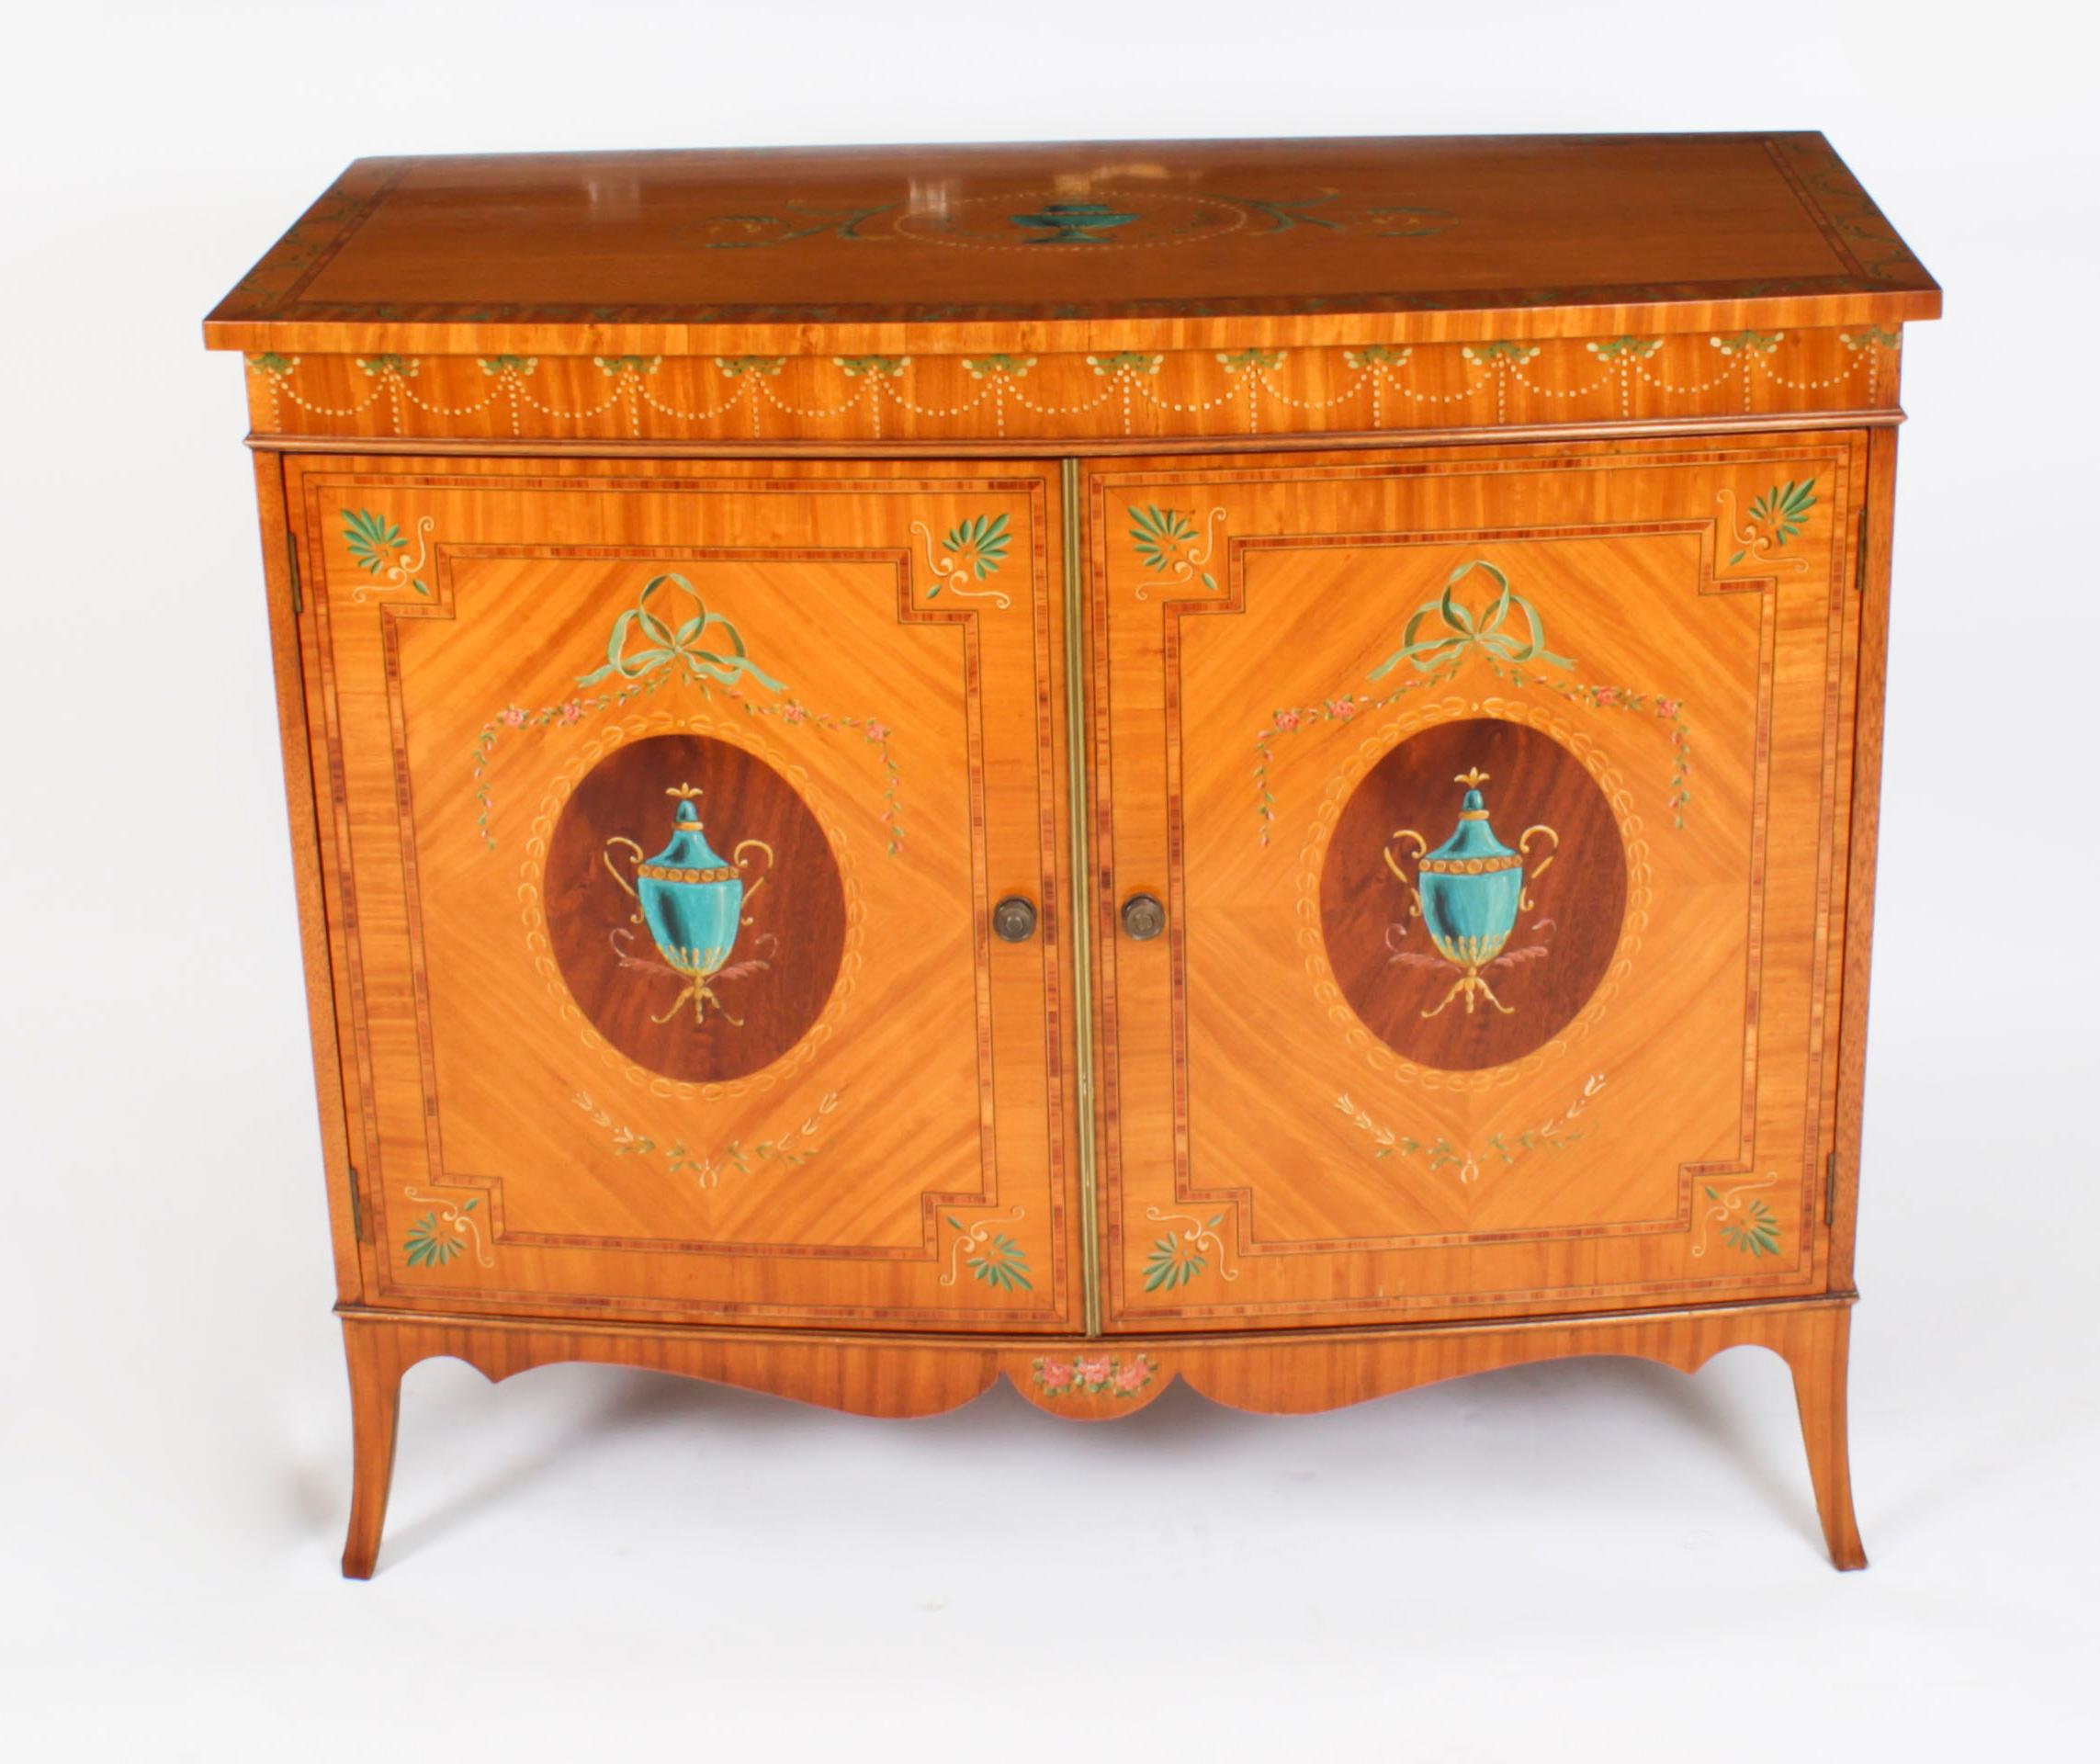 This is a stylish English Edwardian satinwood, hand-painted and wood banded bowfront side cabinet, circa 1900 in date.
 
This splendid cabinet is made of the finest quality satinwood and hand painted in the manner of Angelica Kauffman. The top is